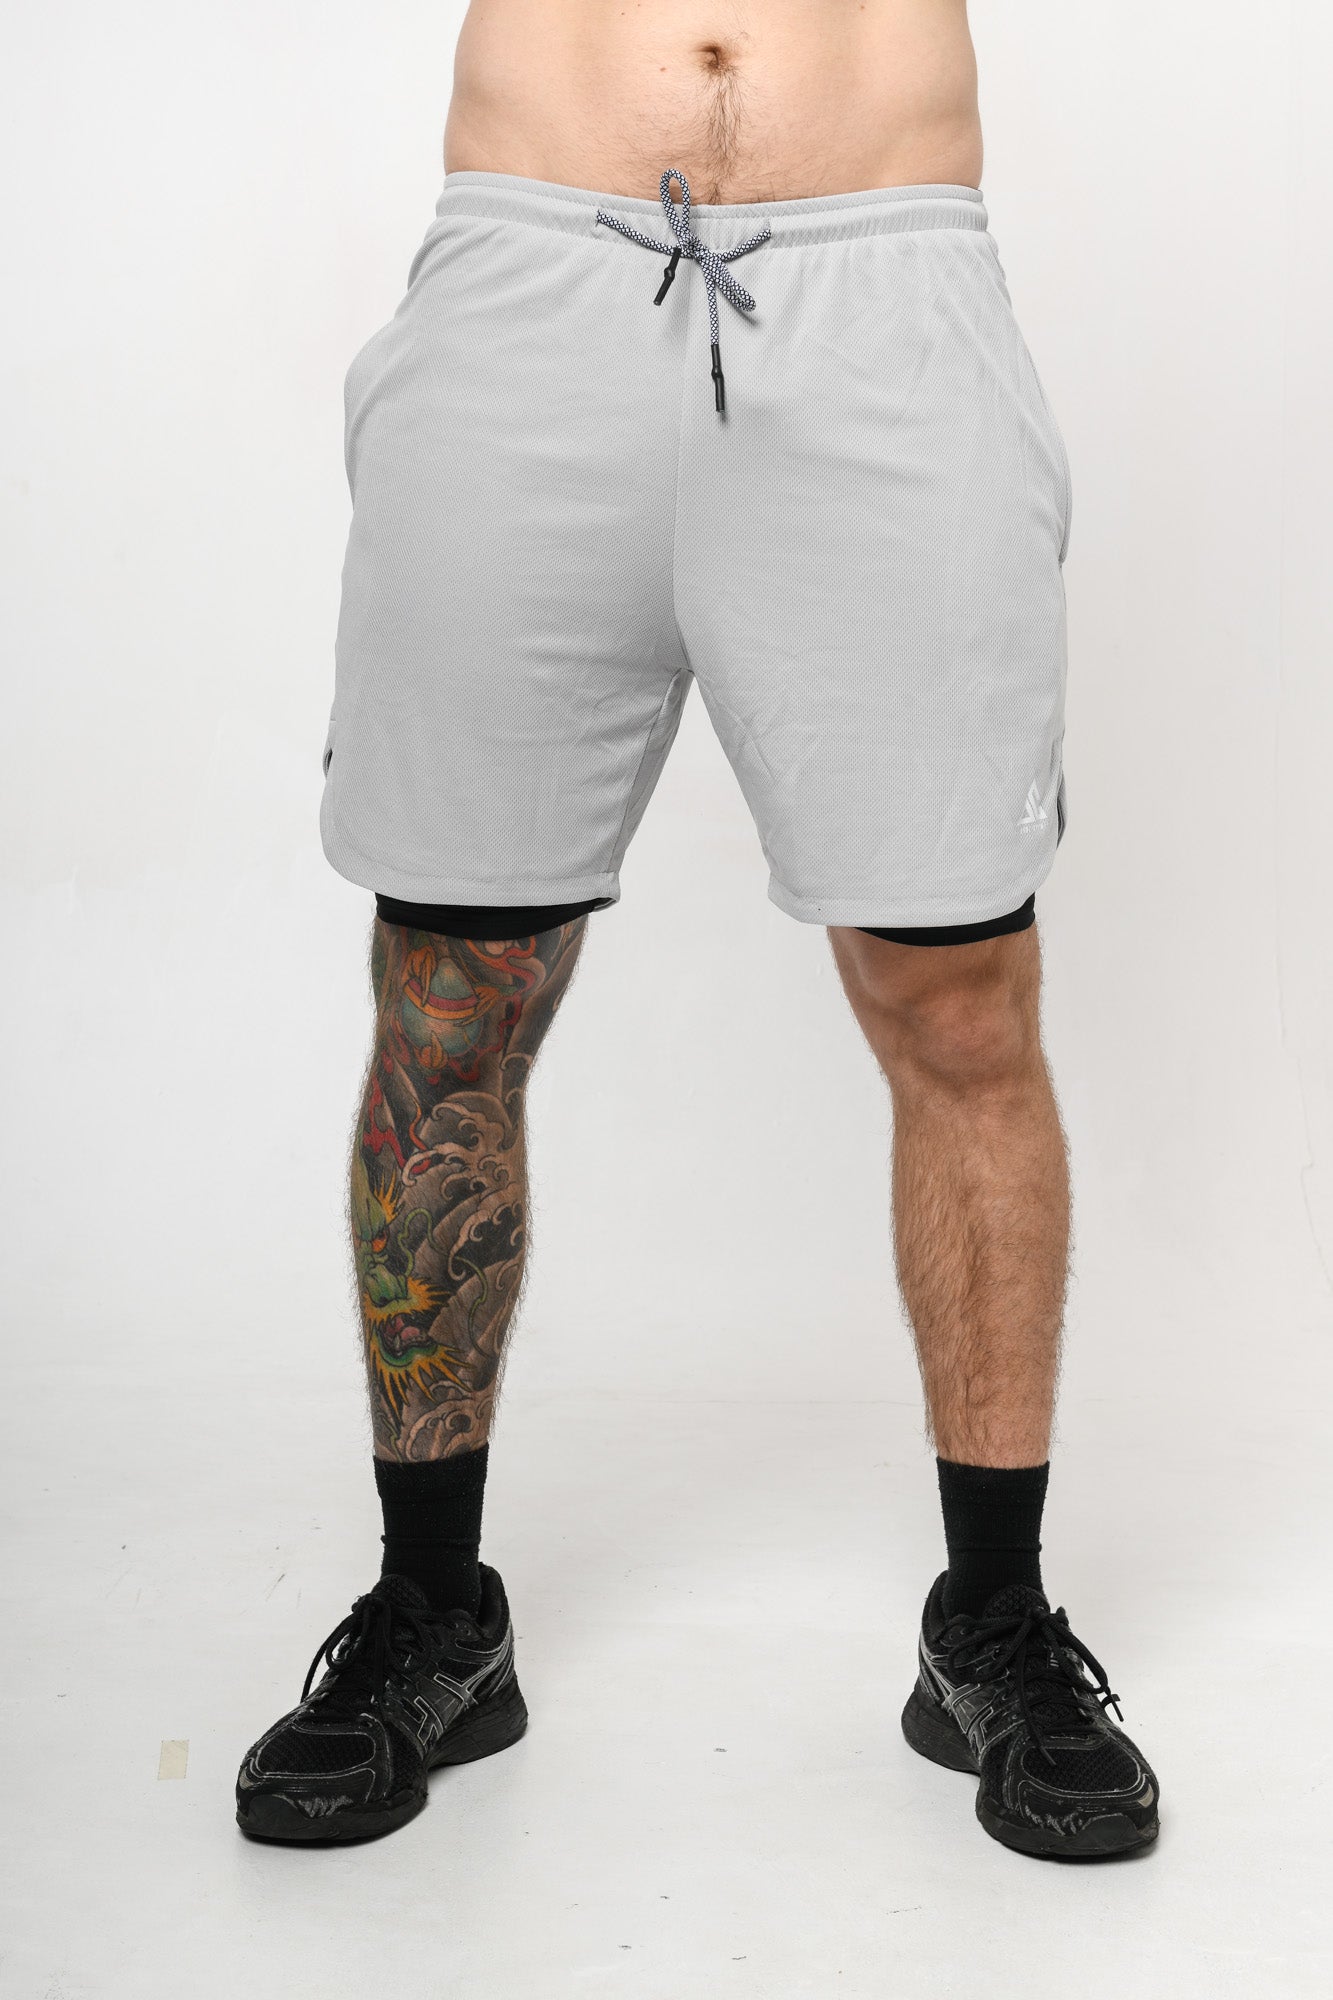 Genesis Shorts – Light Grey  mens 2 in 1 gym shorts – Official